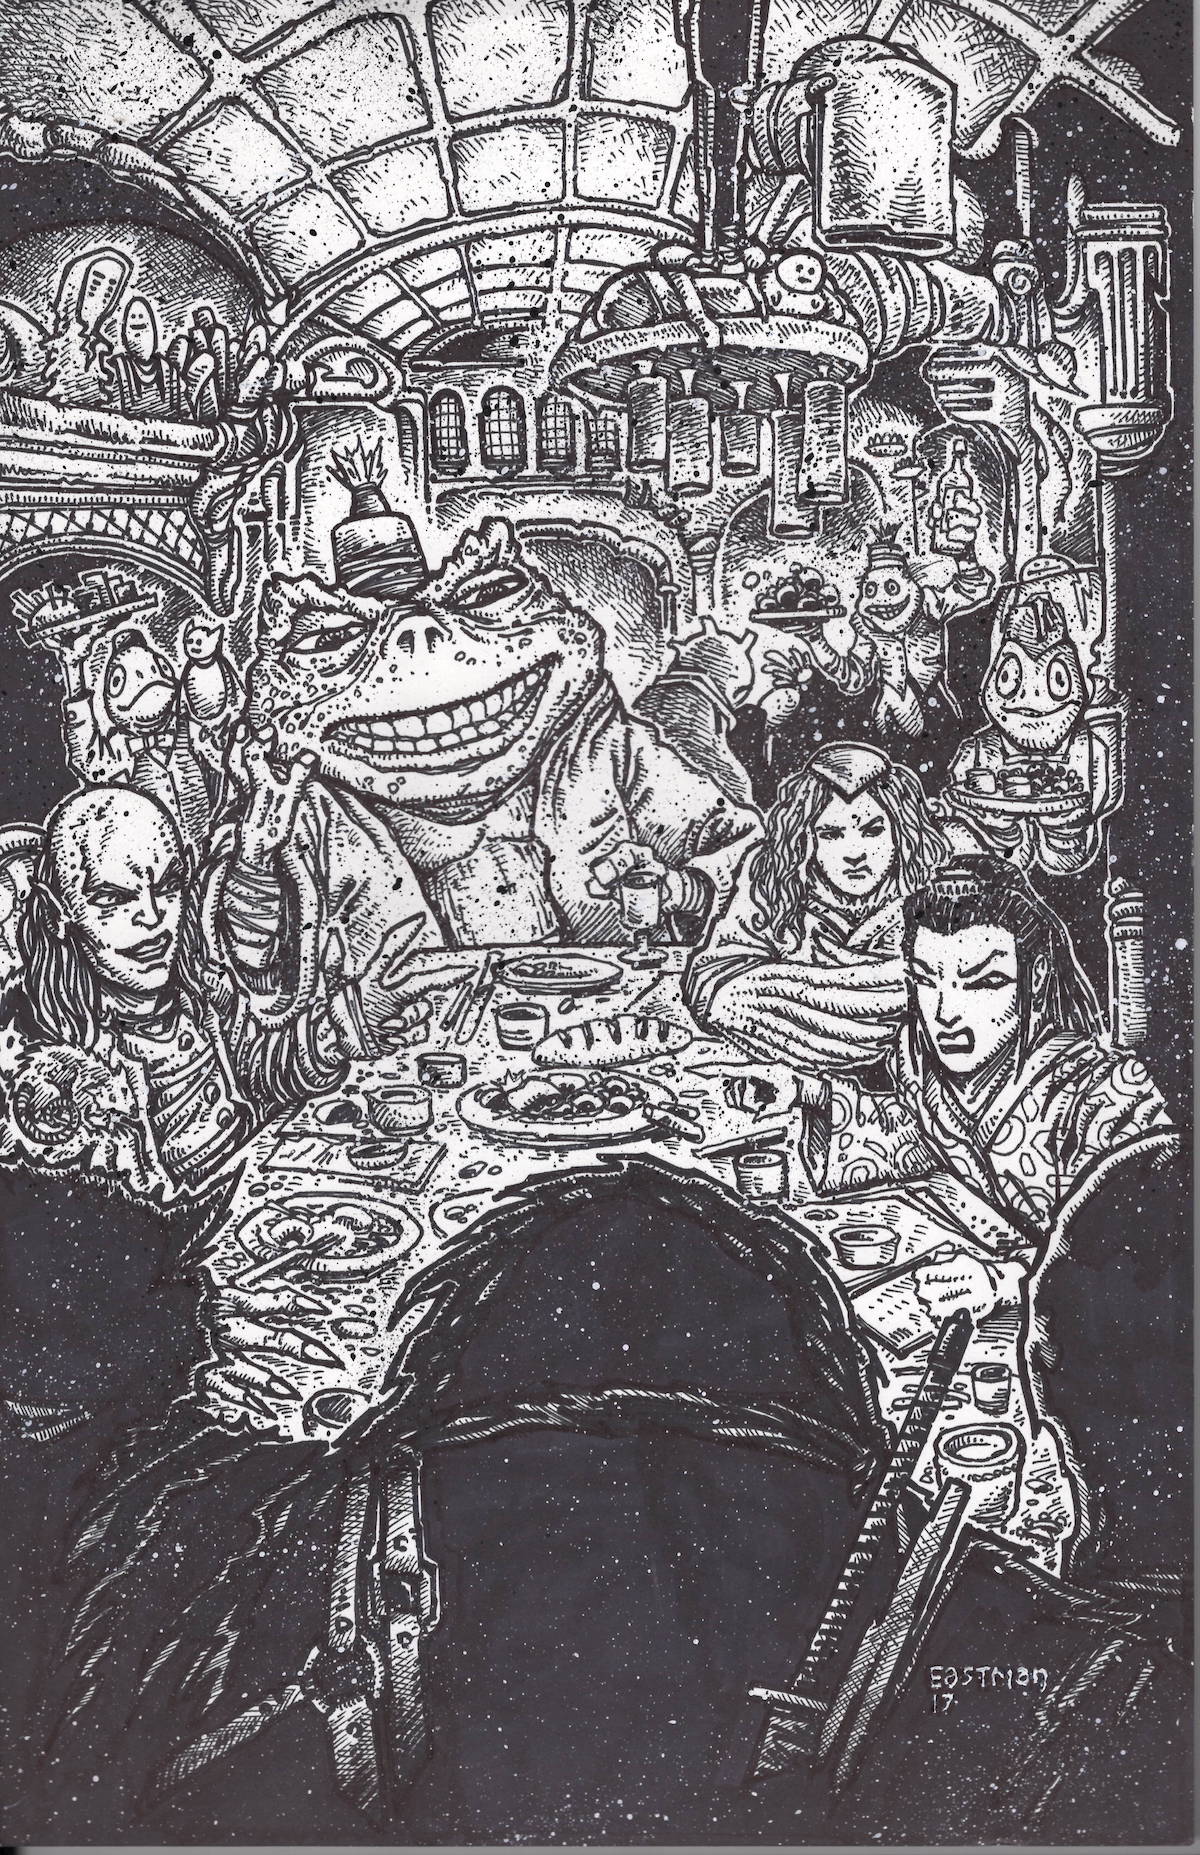 TMNT Issue 71 Original Art –  A Feast At Toad Baron’s